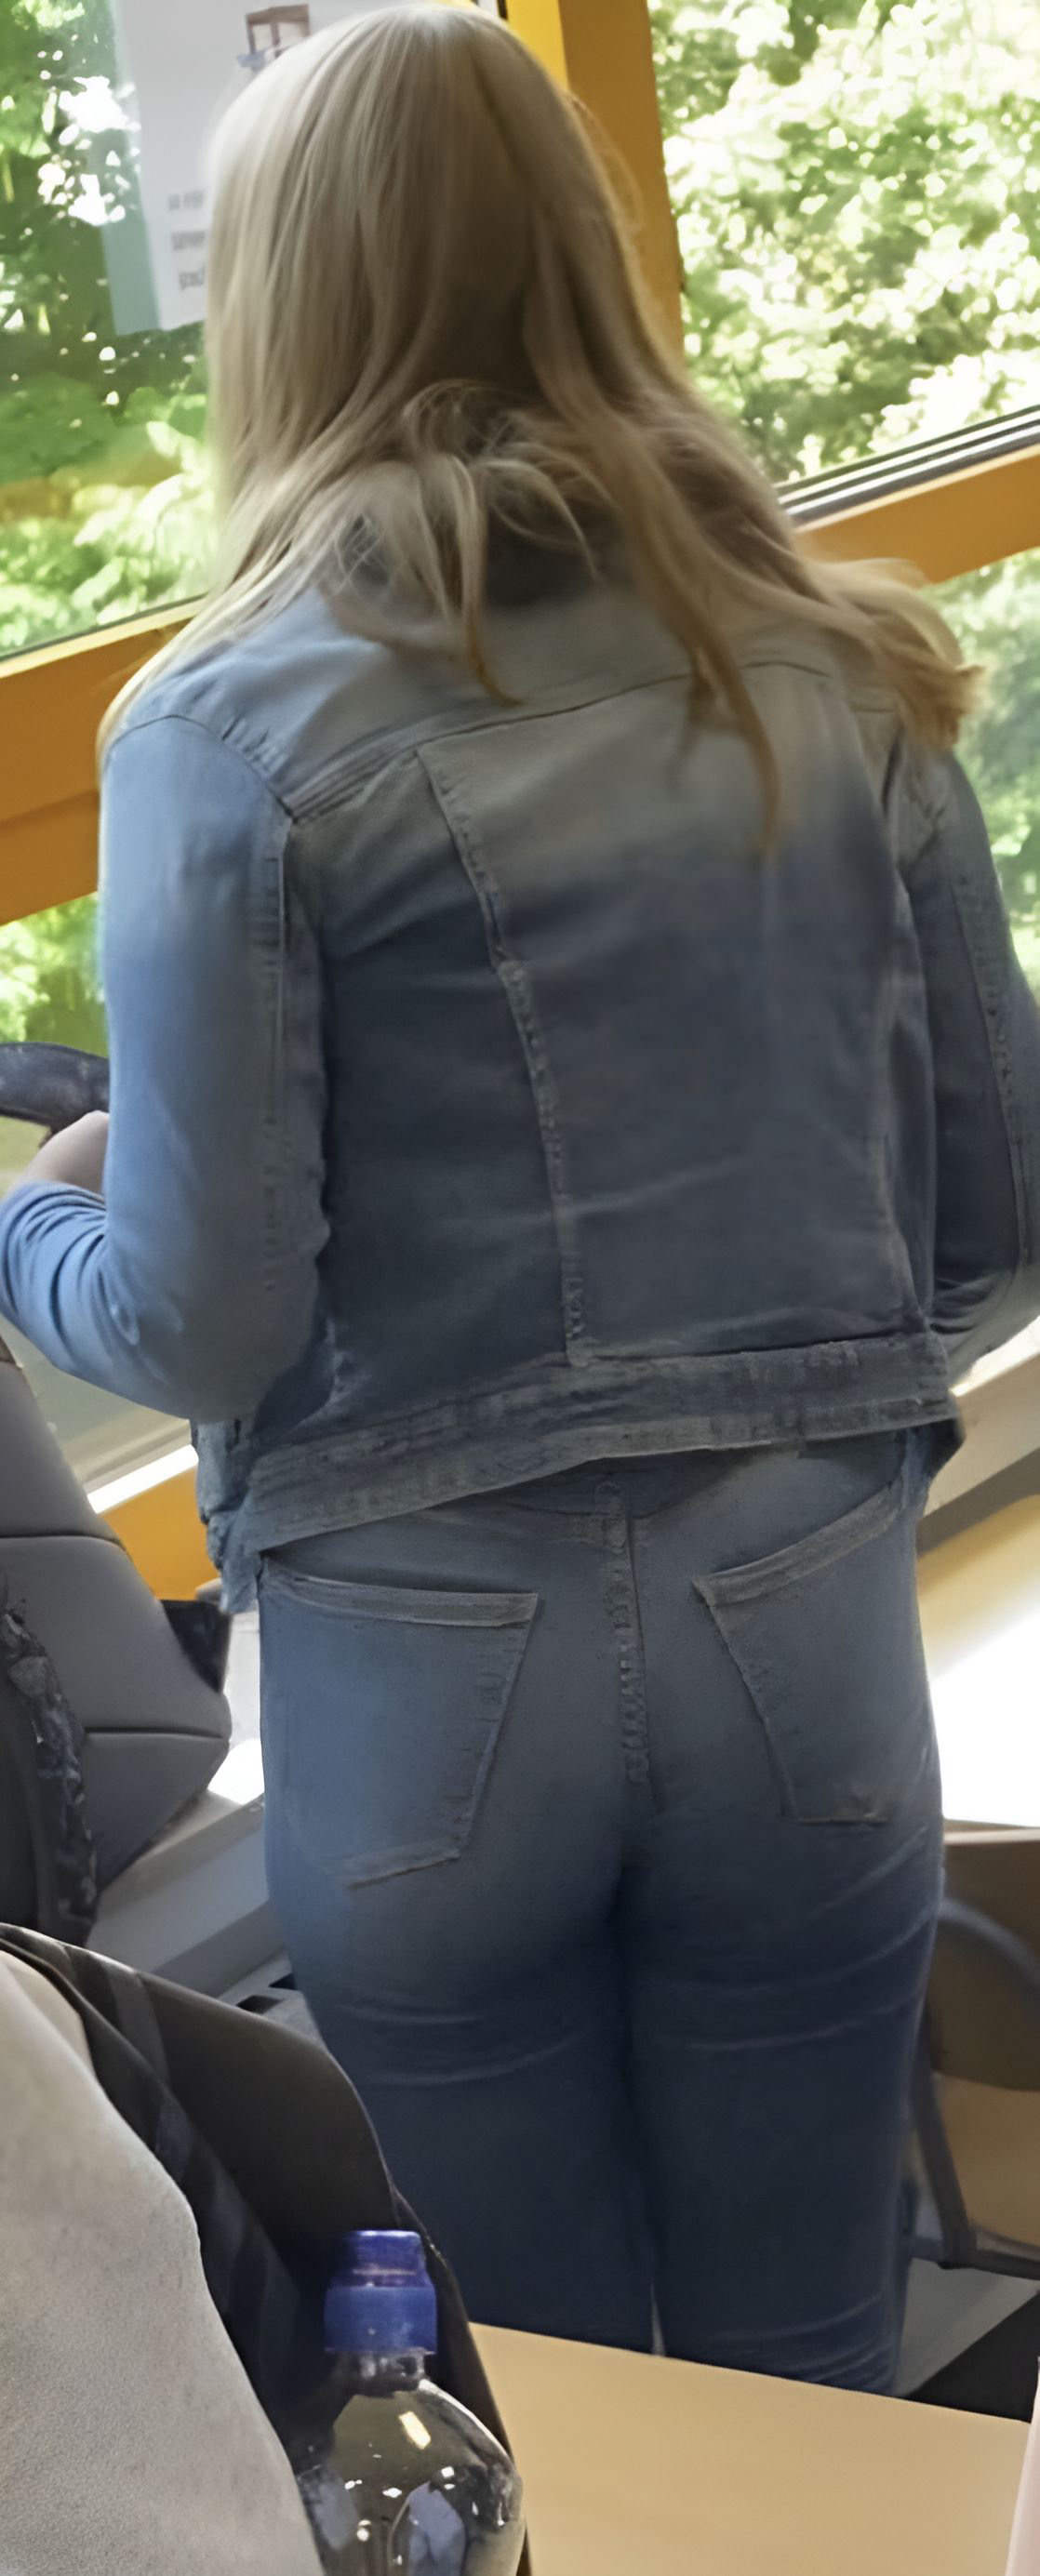 Sexy Teen Jeans